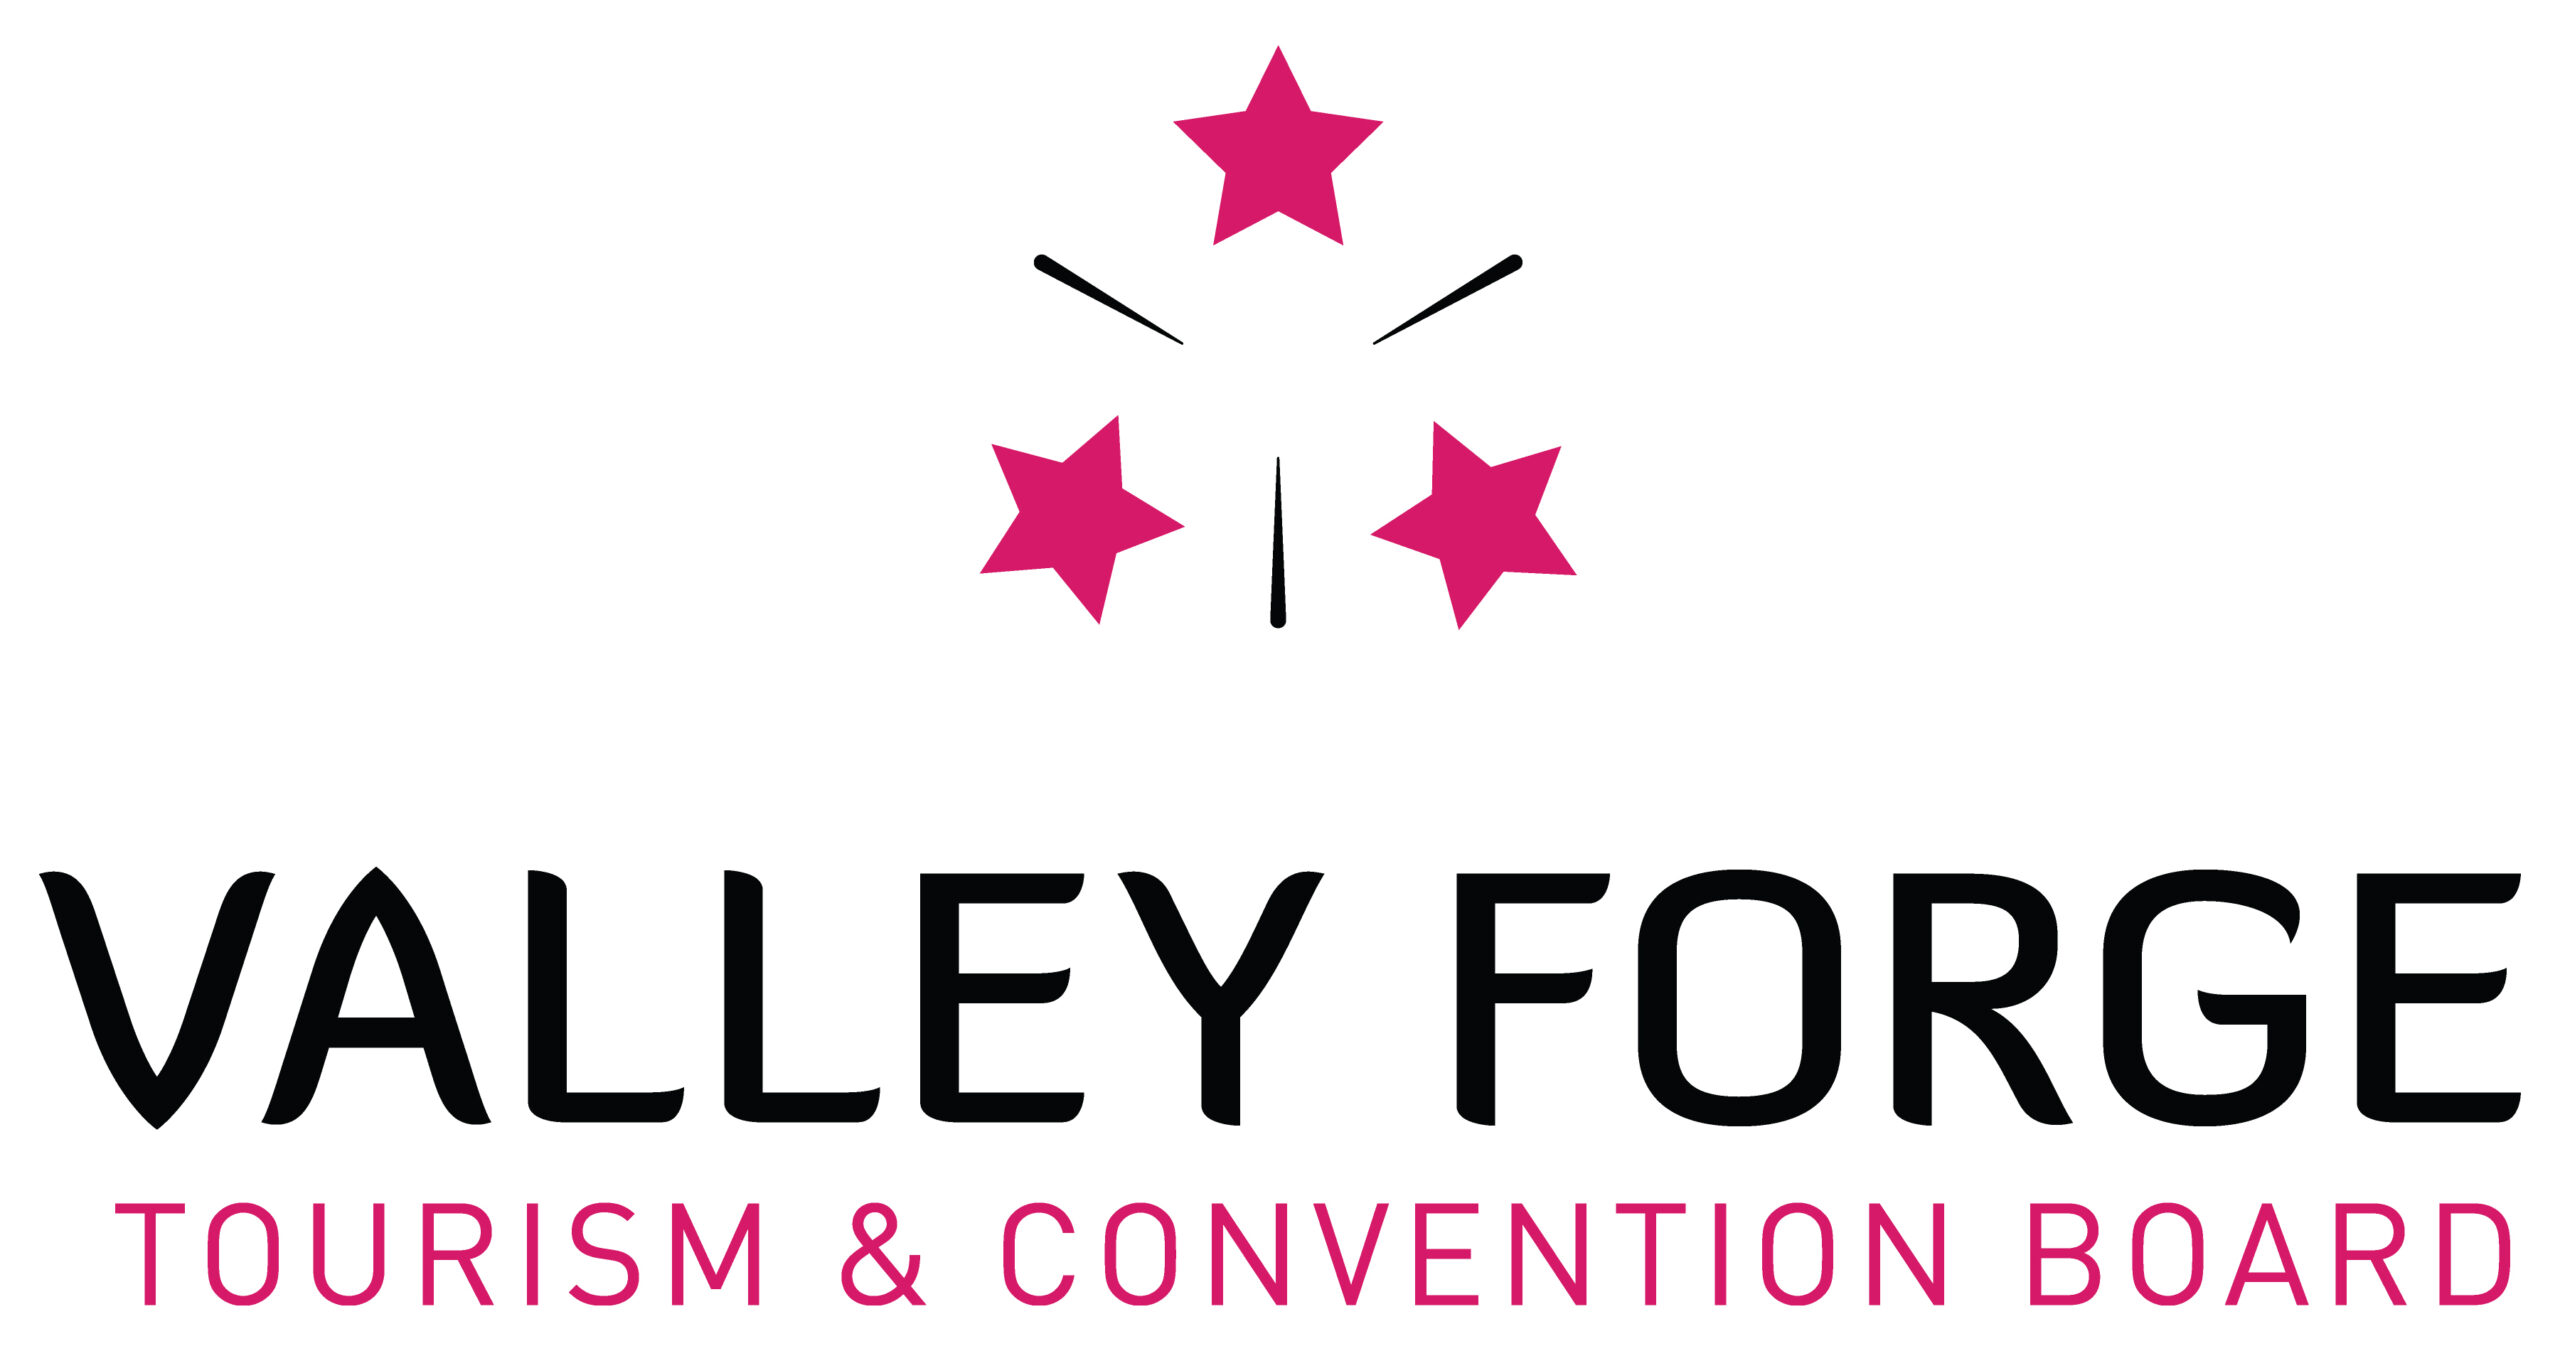 valley forge tourism logo